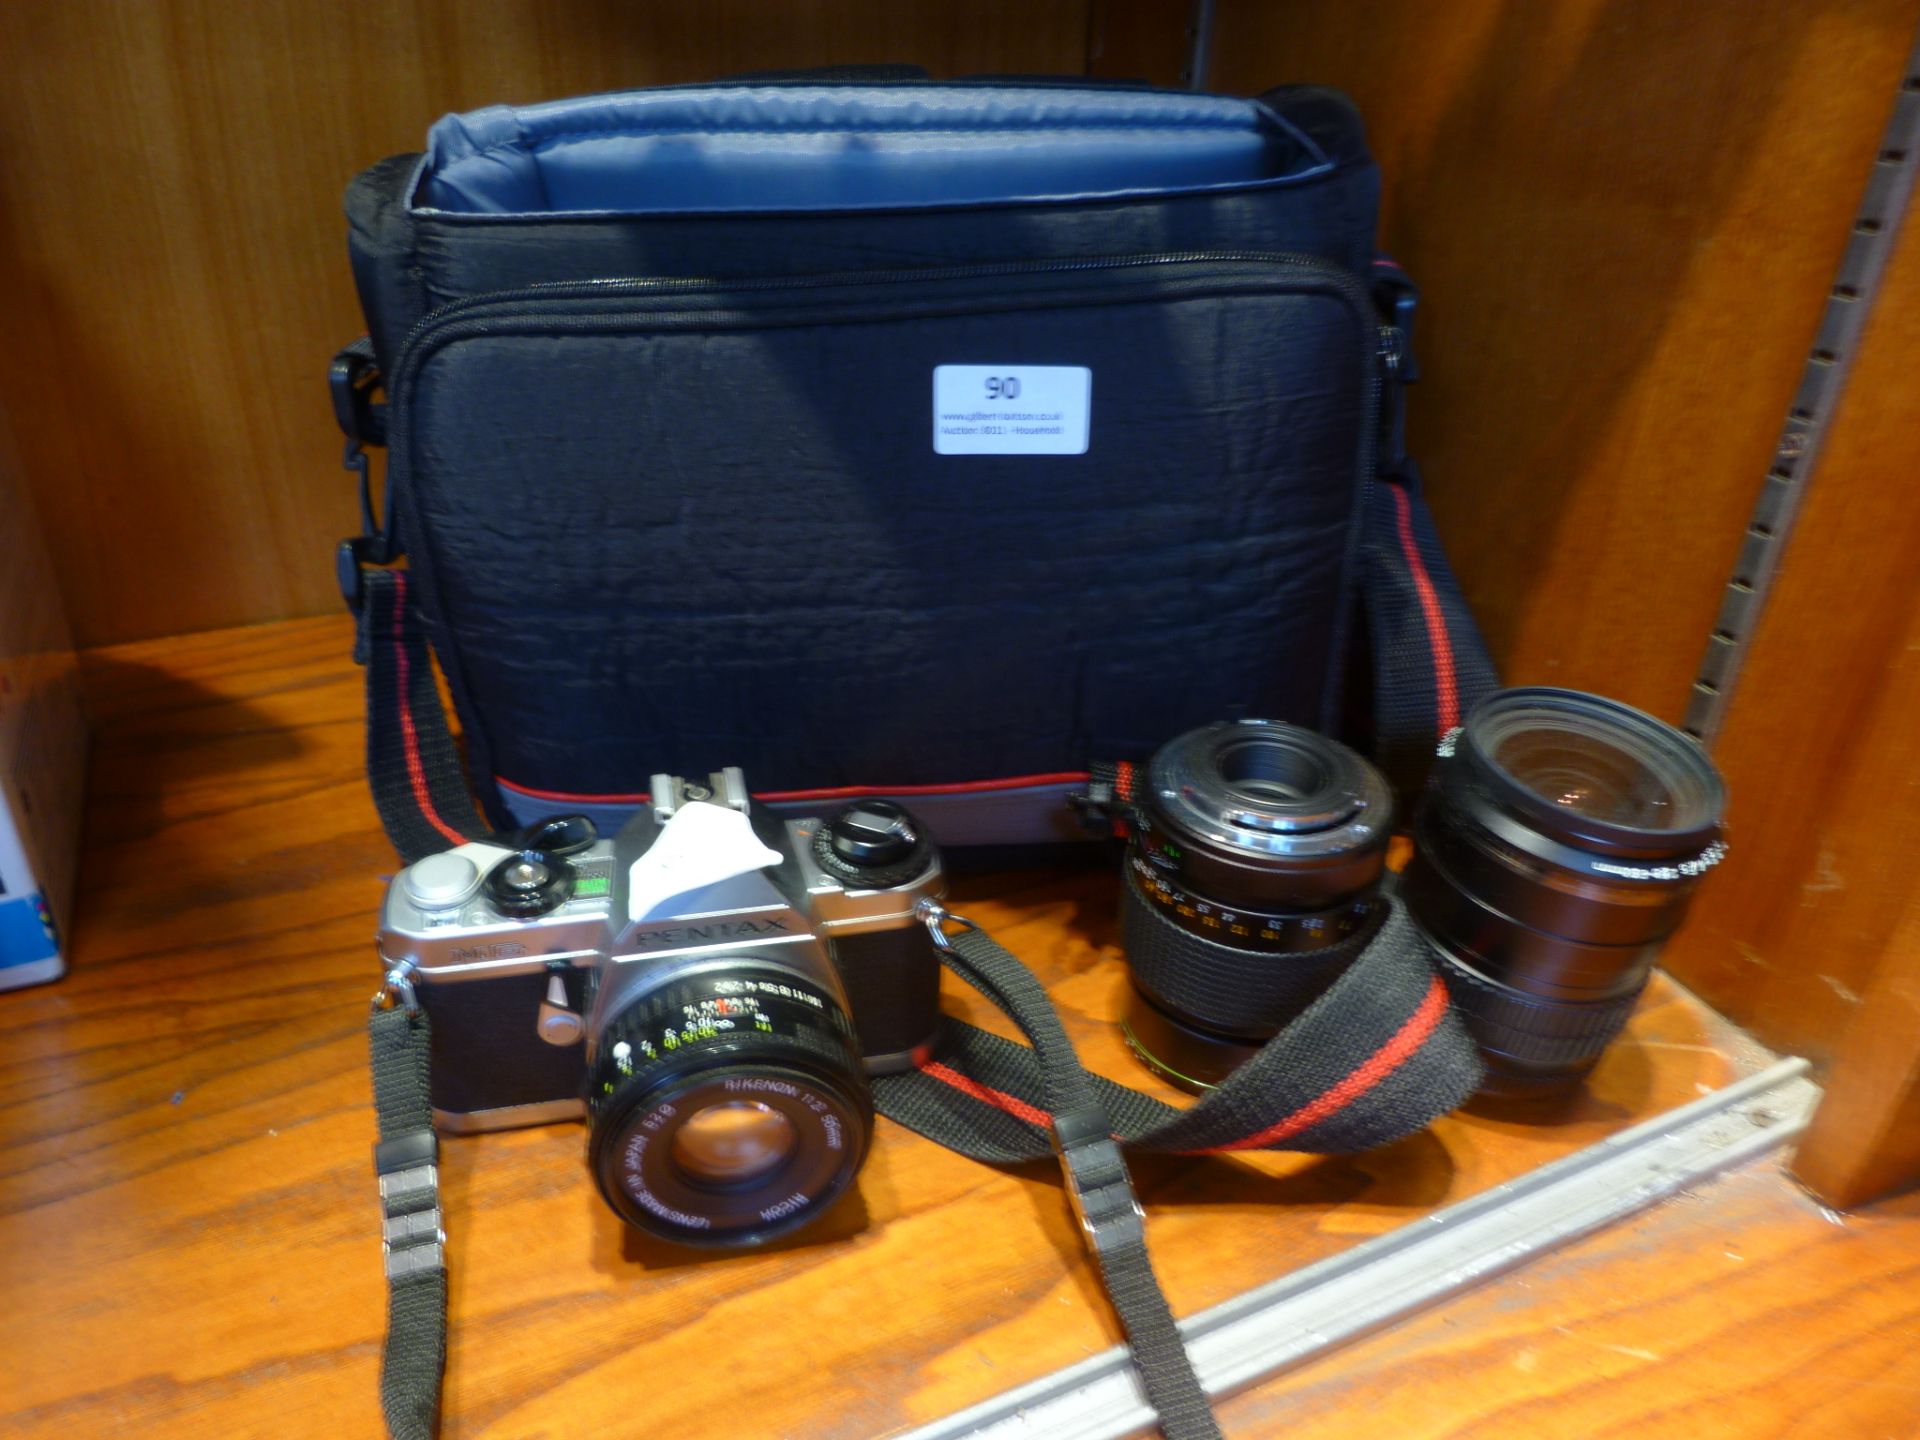 Pentax MG Camera with Two Lenses and Carry Bag